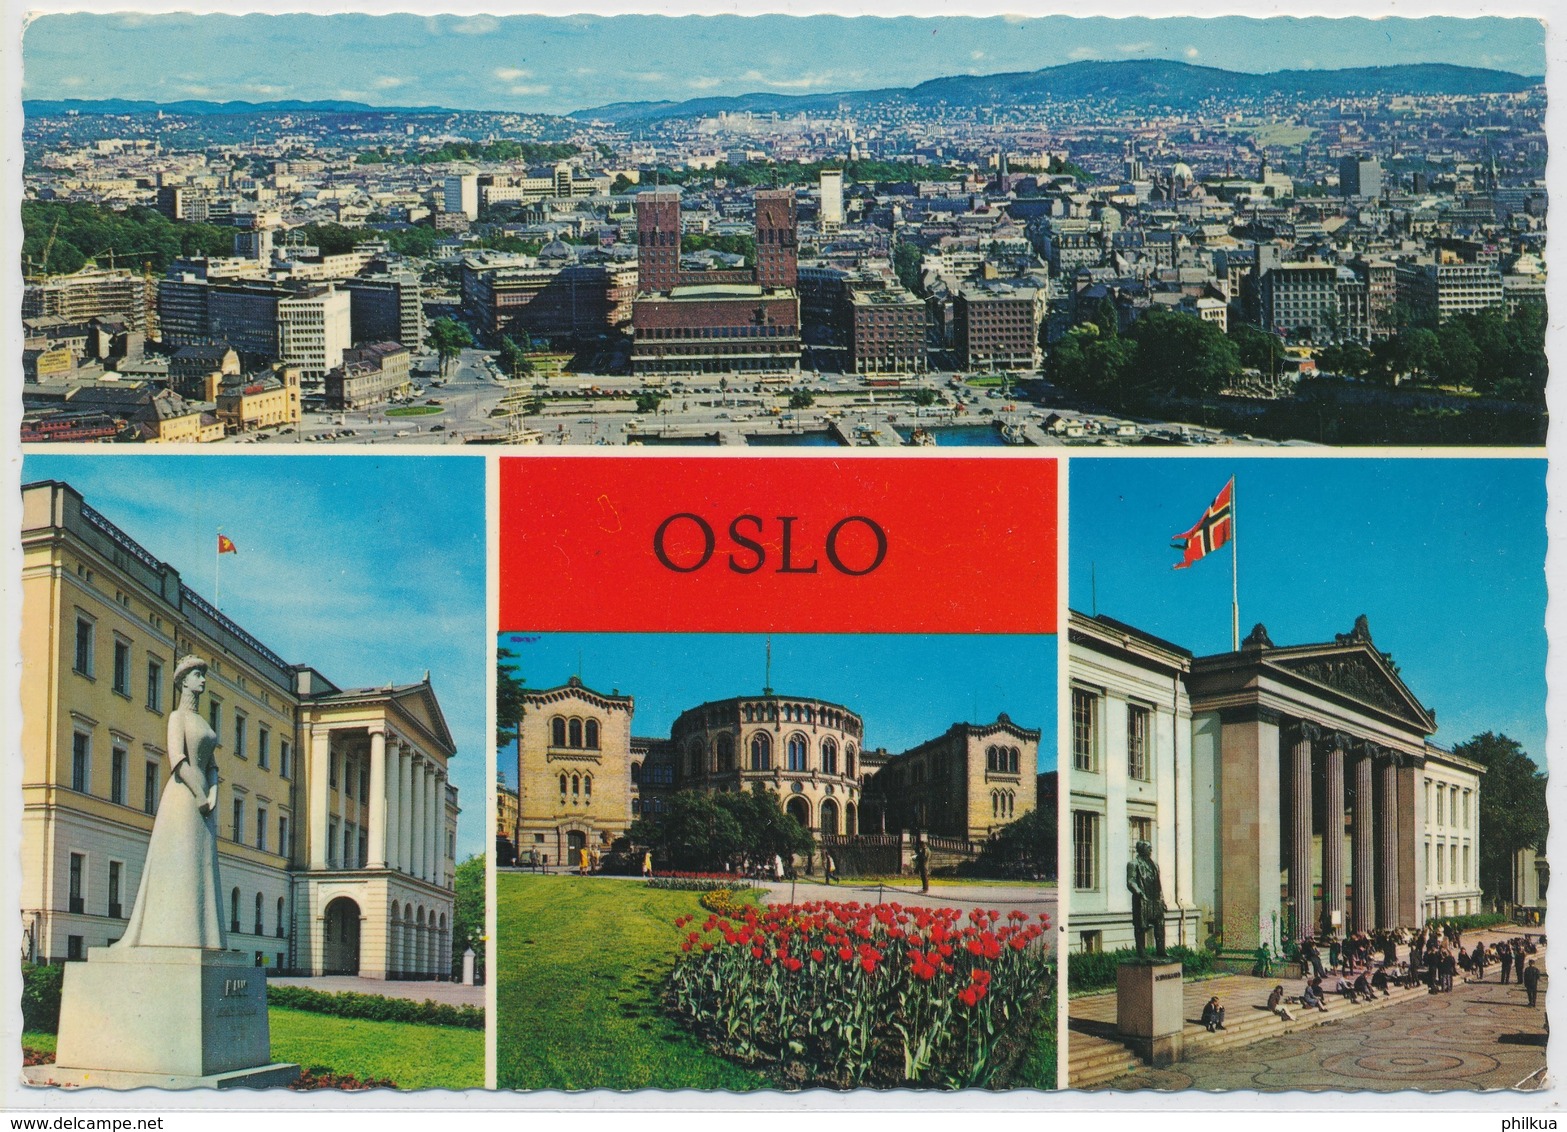 Oslo, Norway - The Town Hall - The Royal Palace - The Parliament Building -The University - Norvège